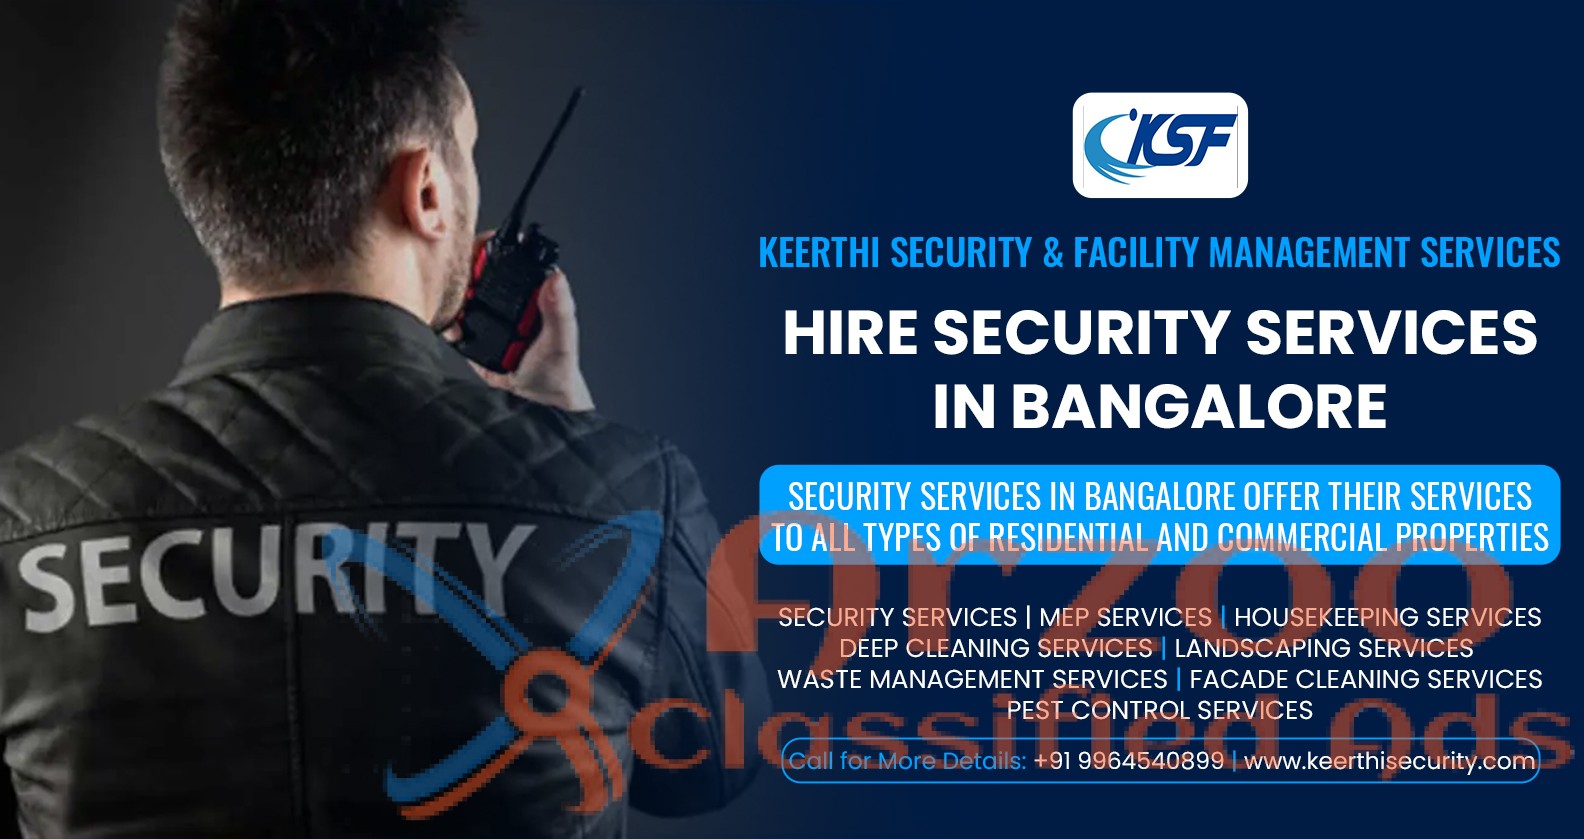 Hire Security services in Bangalore